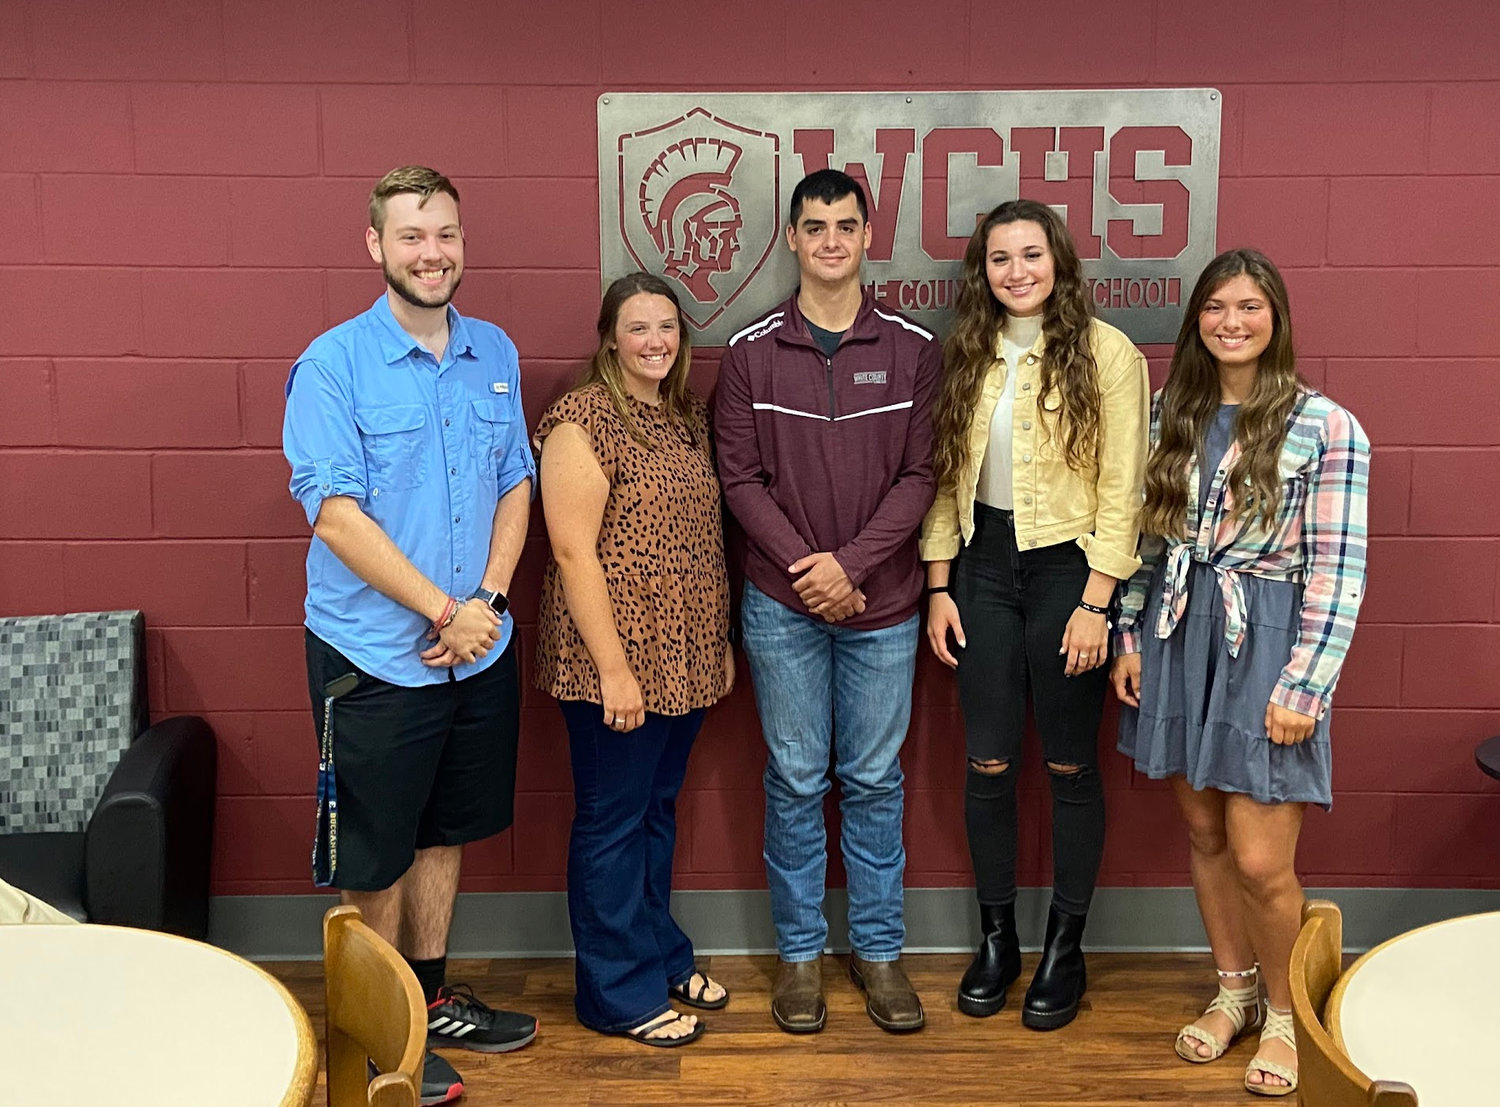 Five of the six White County High School students spotlighted by their teachers were present at a recent school board meeting. The six students are Jake Officer, Keena Anderson, Kiley Moore, Nia Powers, Conner Brewington, and Ryan O’Dell.